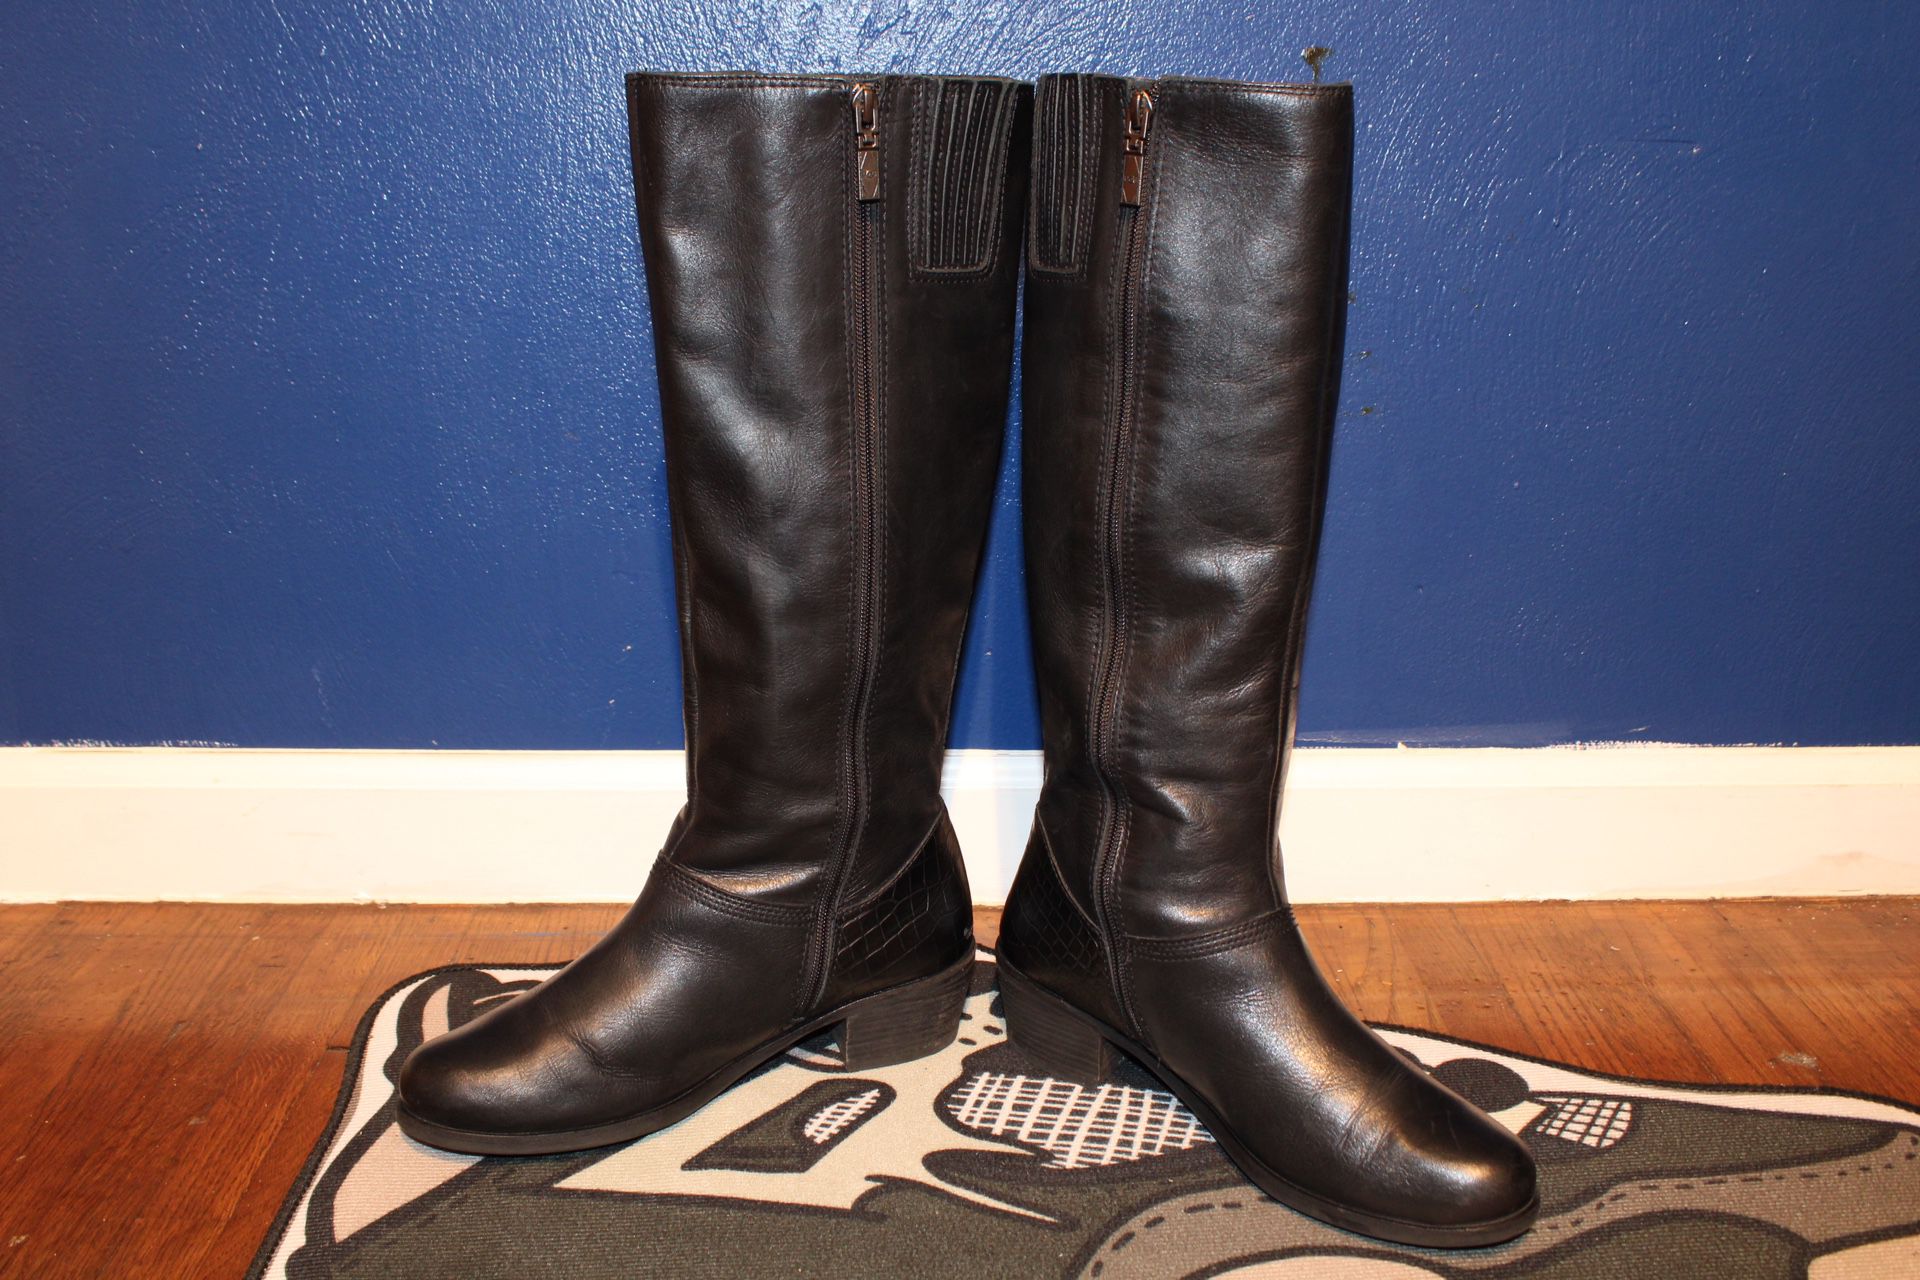 *Best Offer*  UGG Australia BARTON CROCO BLACK LEATHER EQUESTRIAN Riding Tall BOOTS 1013029 